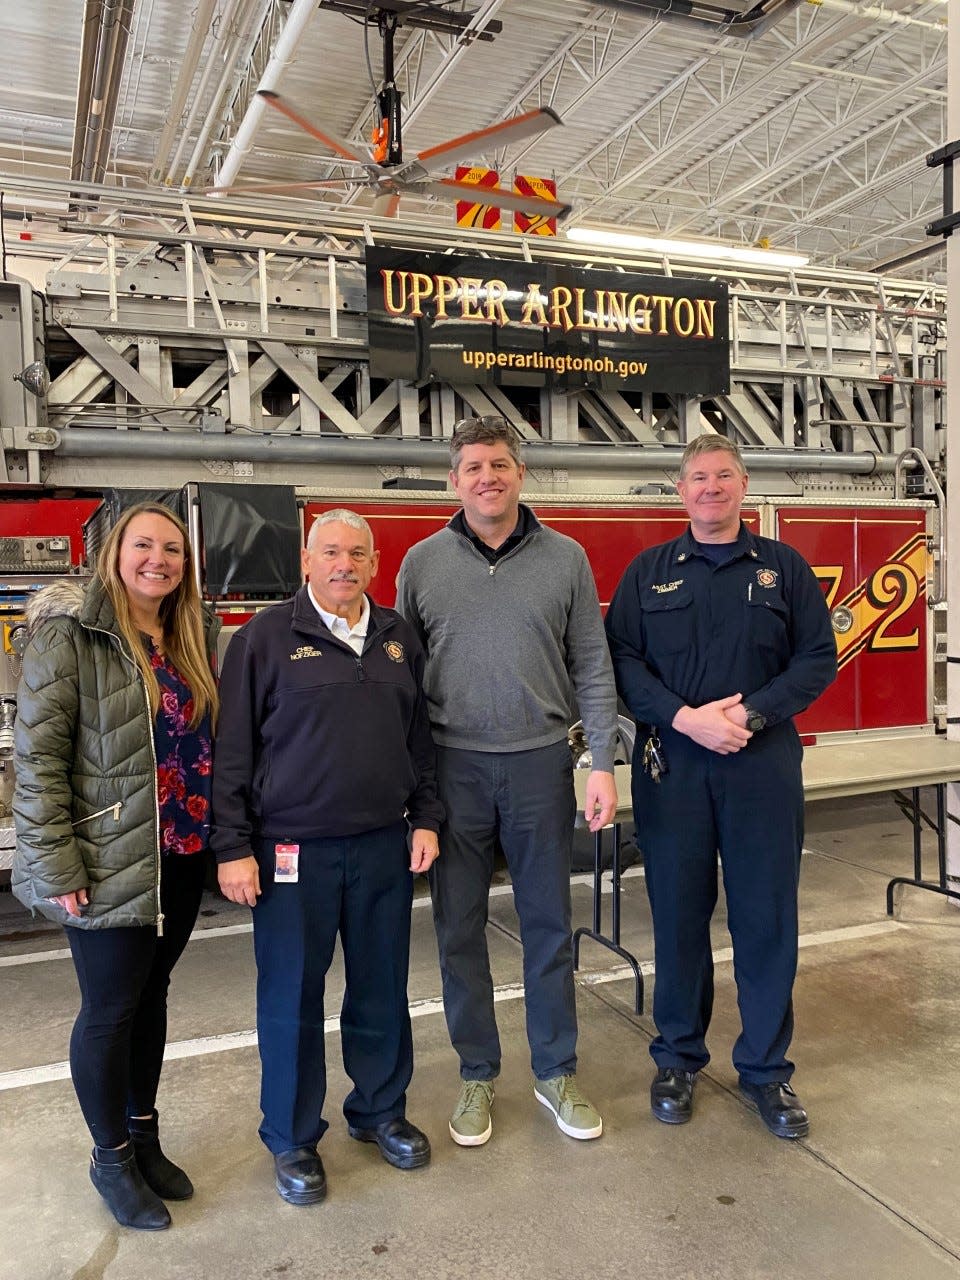 Upper Arlington Fire Division Assistant Chief Christopher Zimmer (far right) will take over as chief March 10 after 23 years on the force. He will succeed Lyn Nofziger (second from left), who has been with the UAFD 34 years, including the past six as chief. Also pictured are Assistant City Manager Jackie Thiel (left) and City Manager Steve Schoeny.